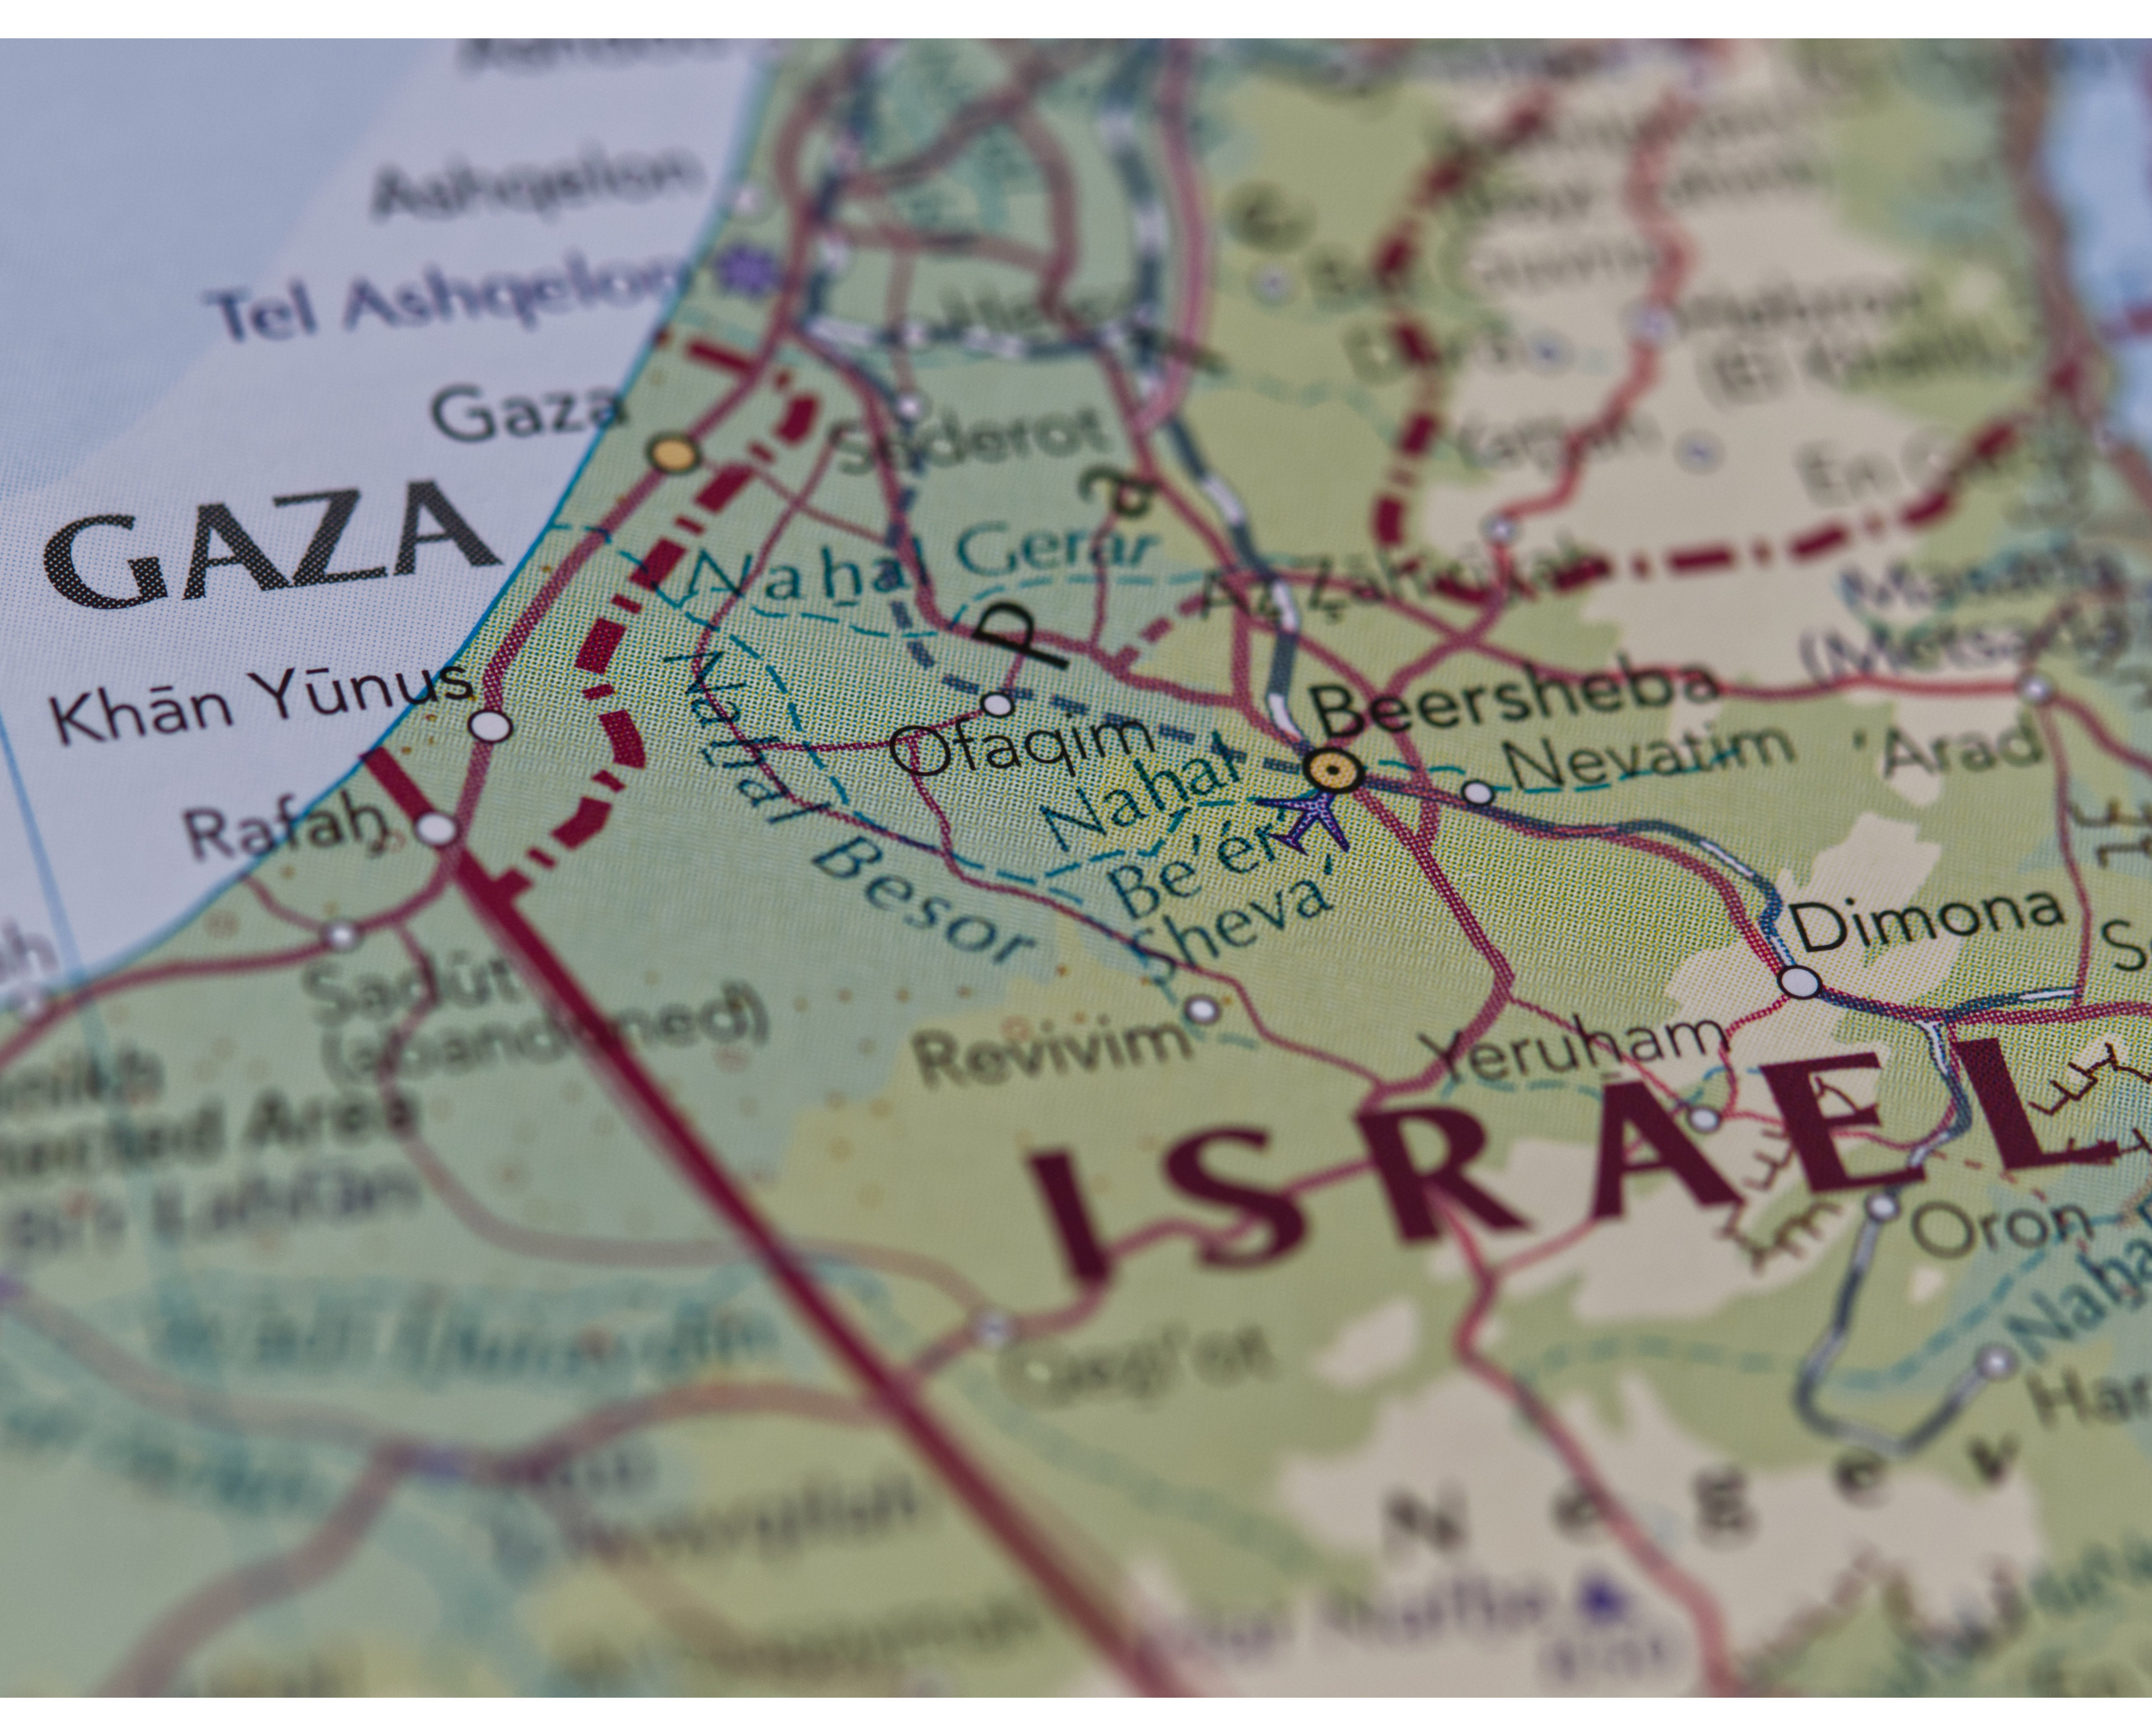 A close-up of a map showing both Gaza and Israel.